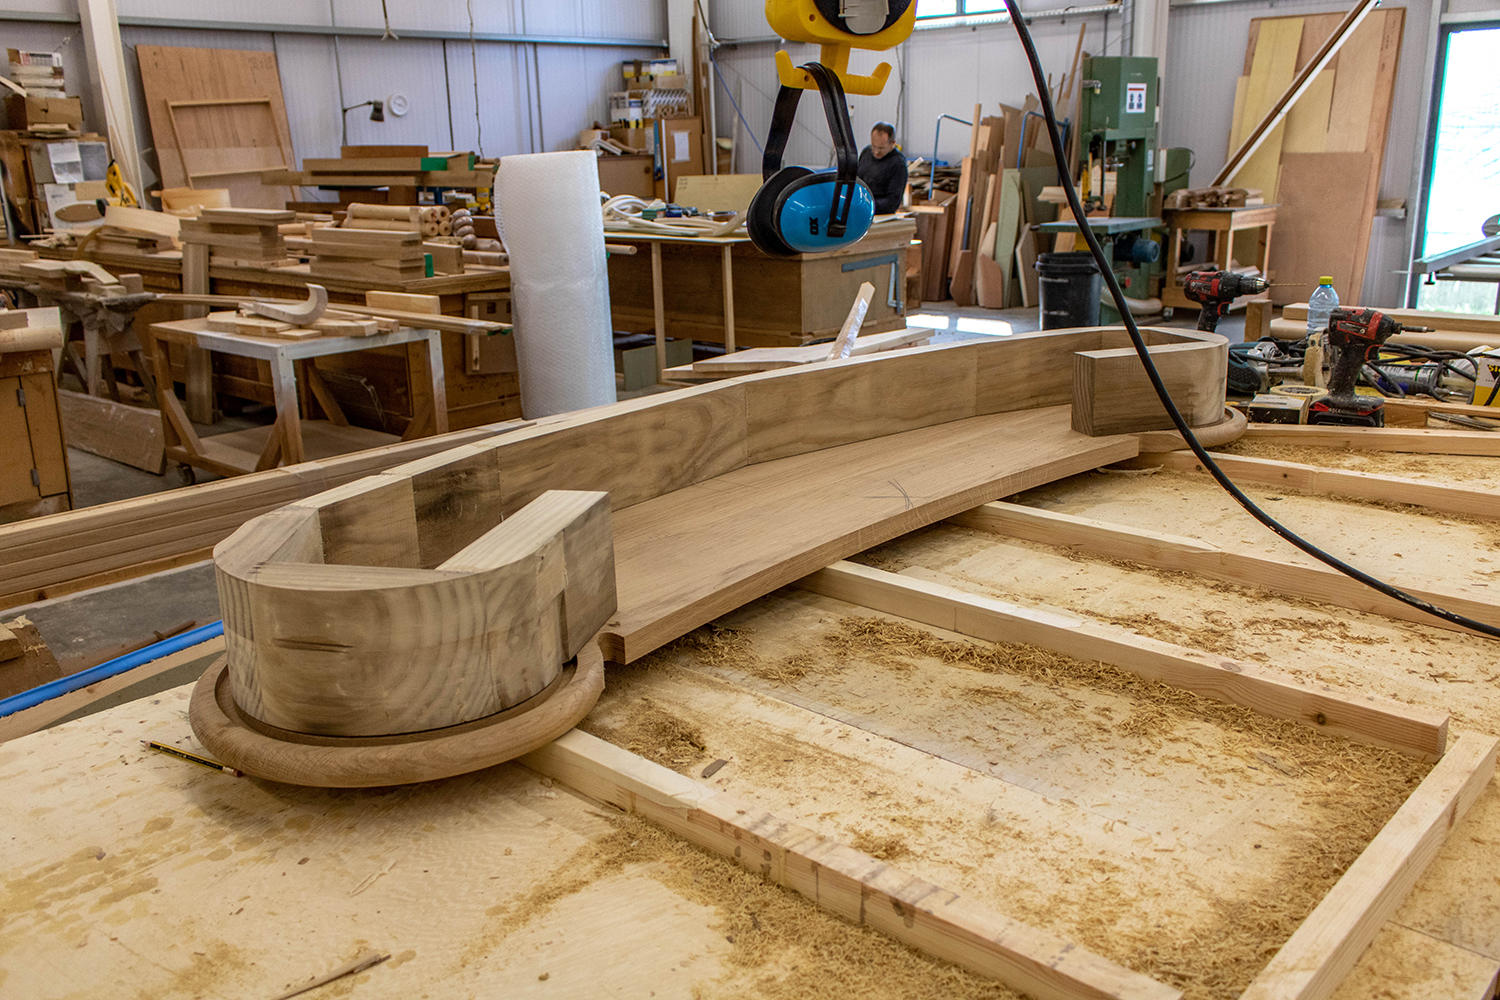 Bespoke curved structure in joinery workshop